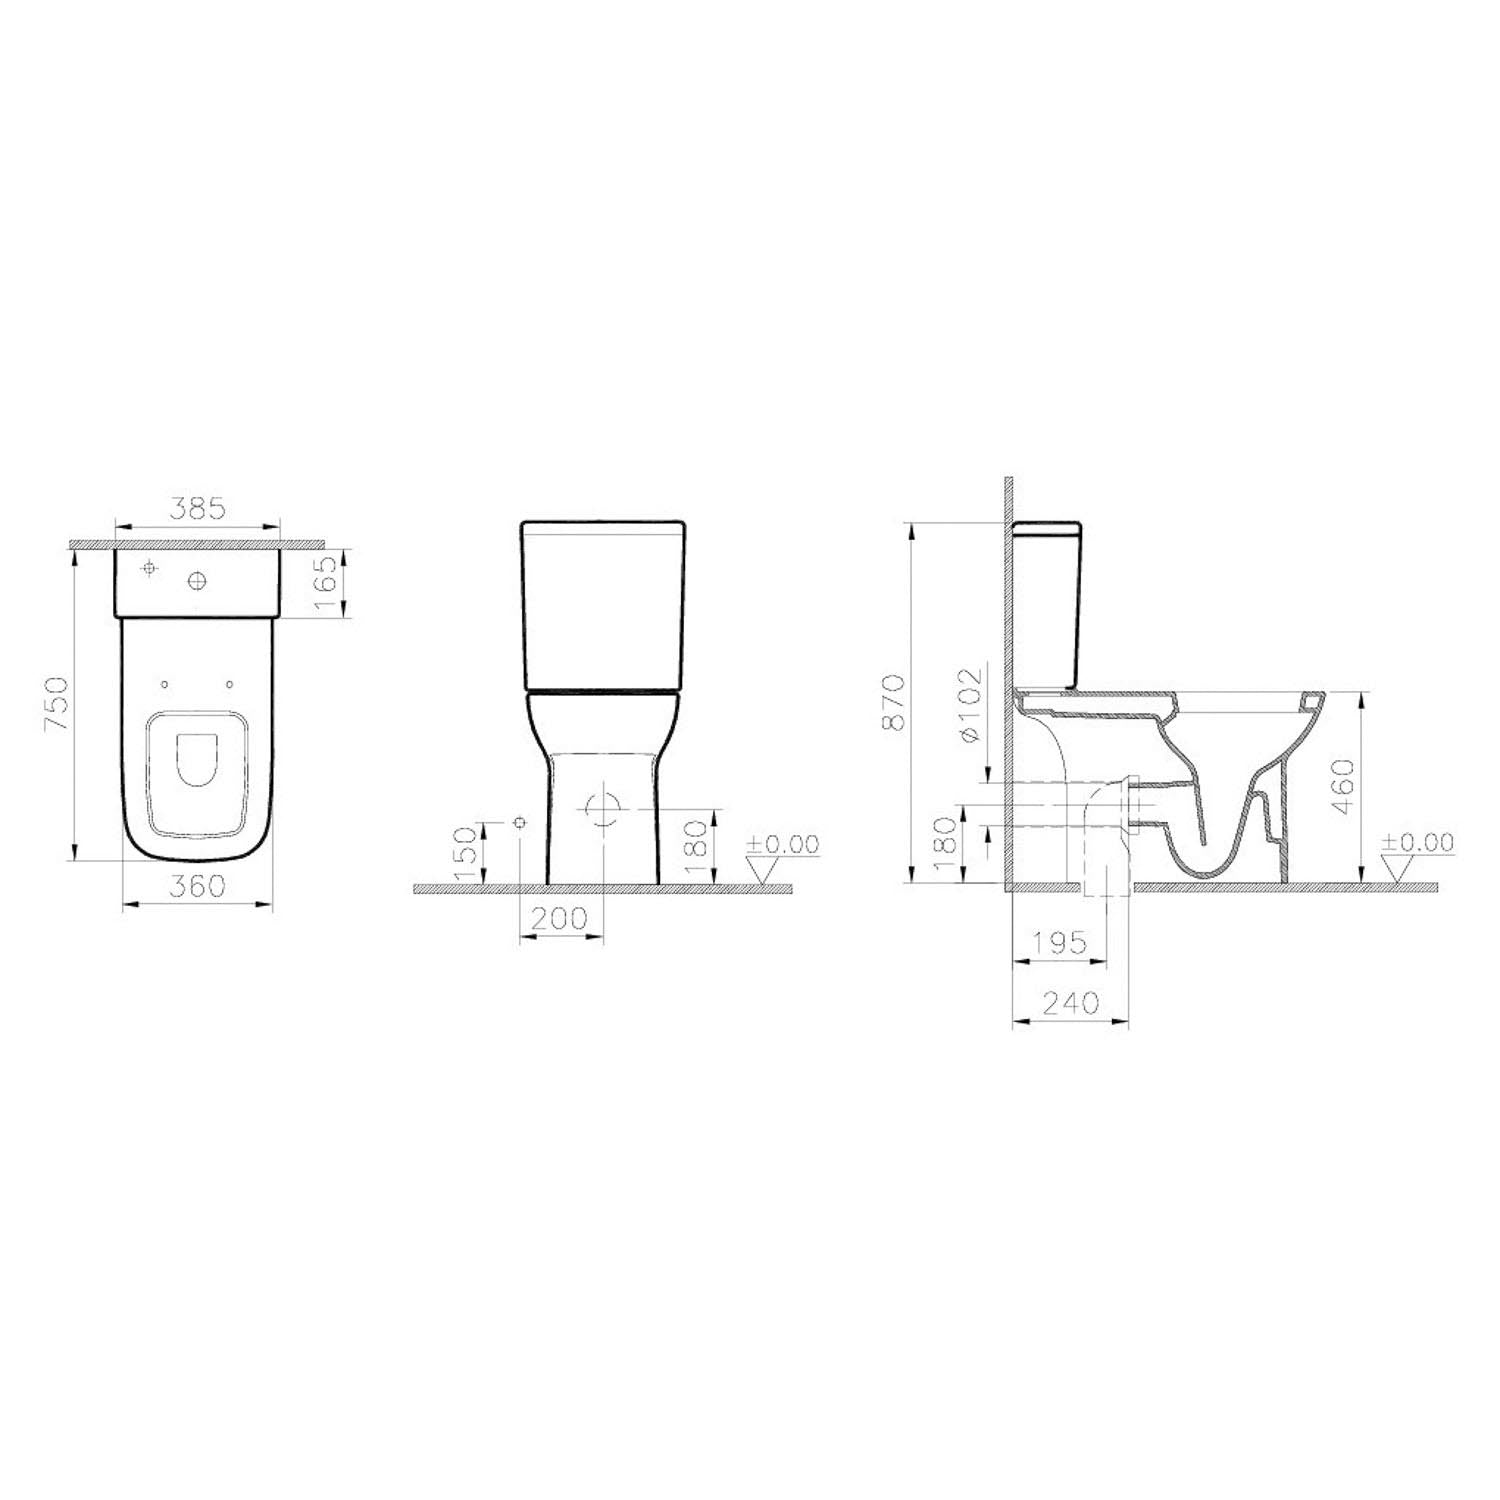 Consilio Comfort Height Close Coupled Toilet with the seat and cover dimensional drawing